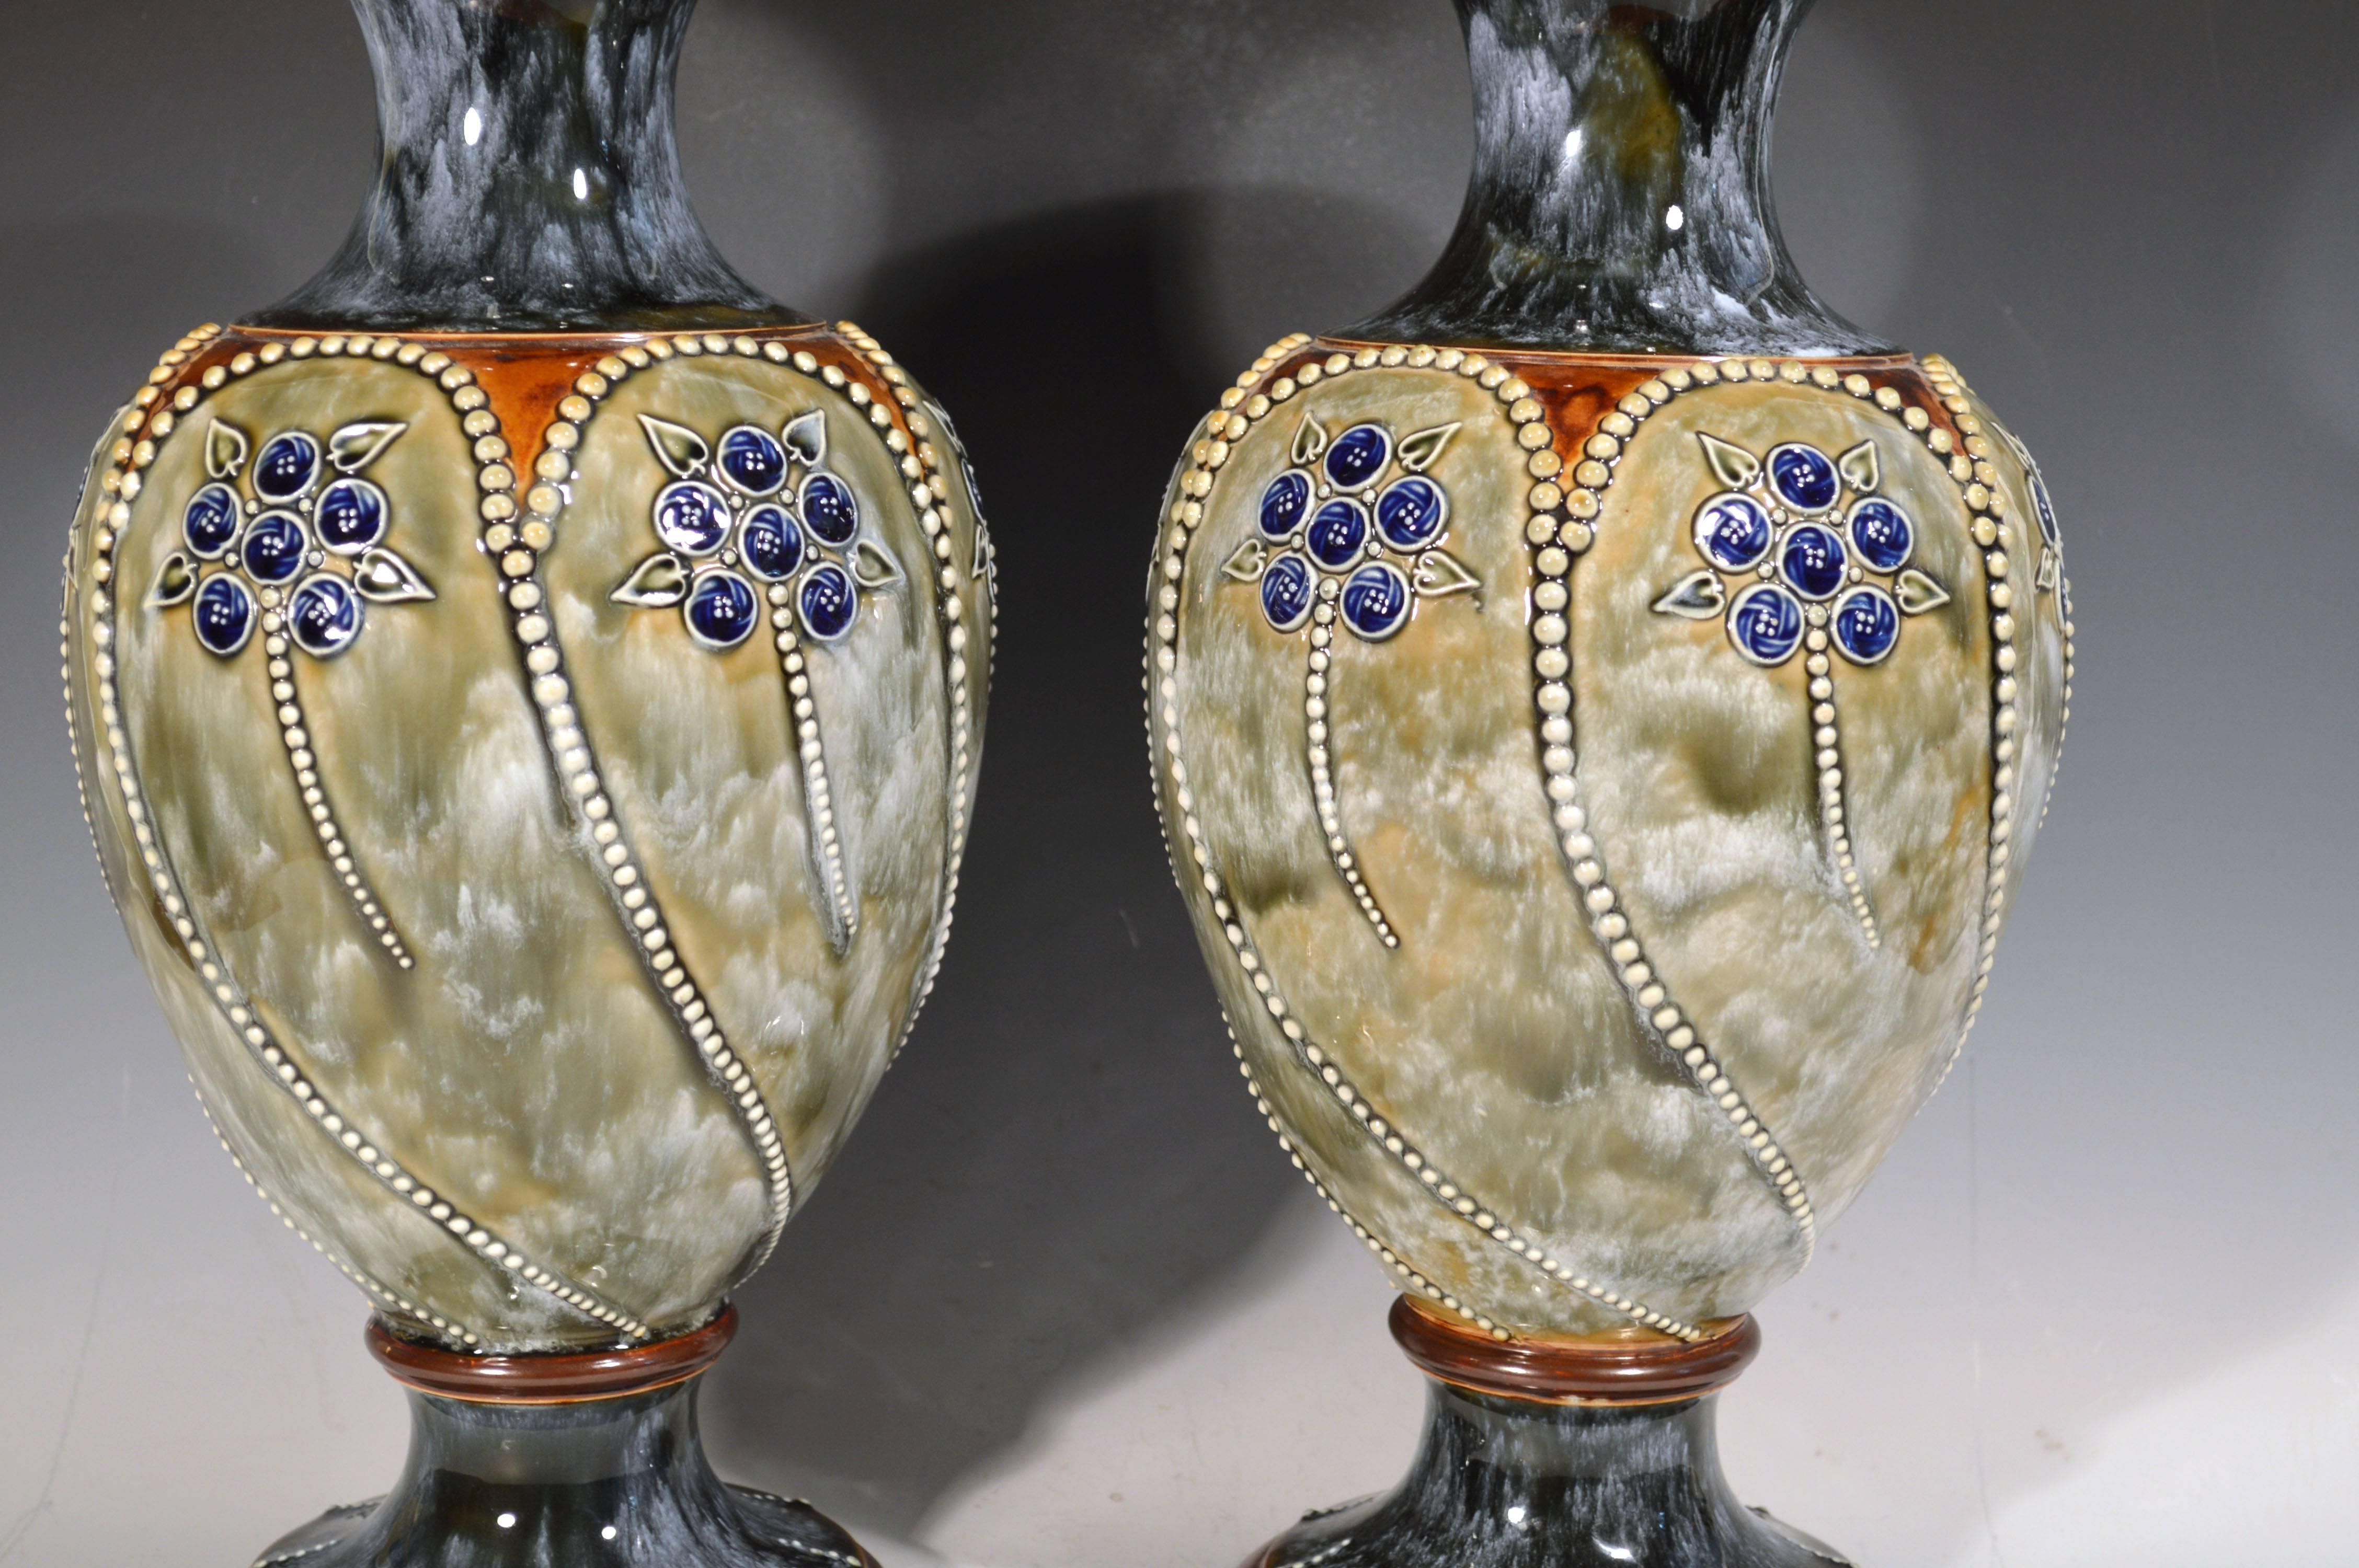 20th Century Royal Doulton Marbled Pottery Vases, 1903-1905